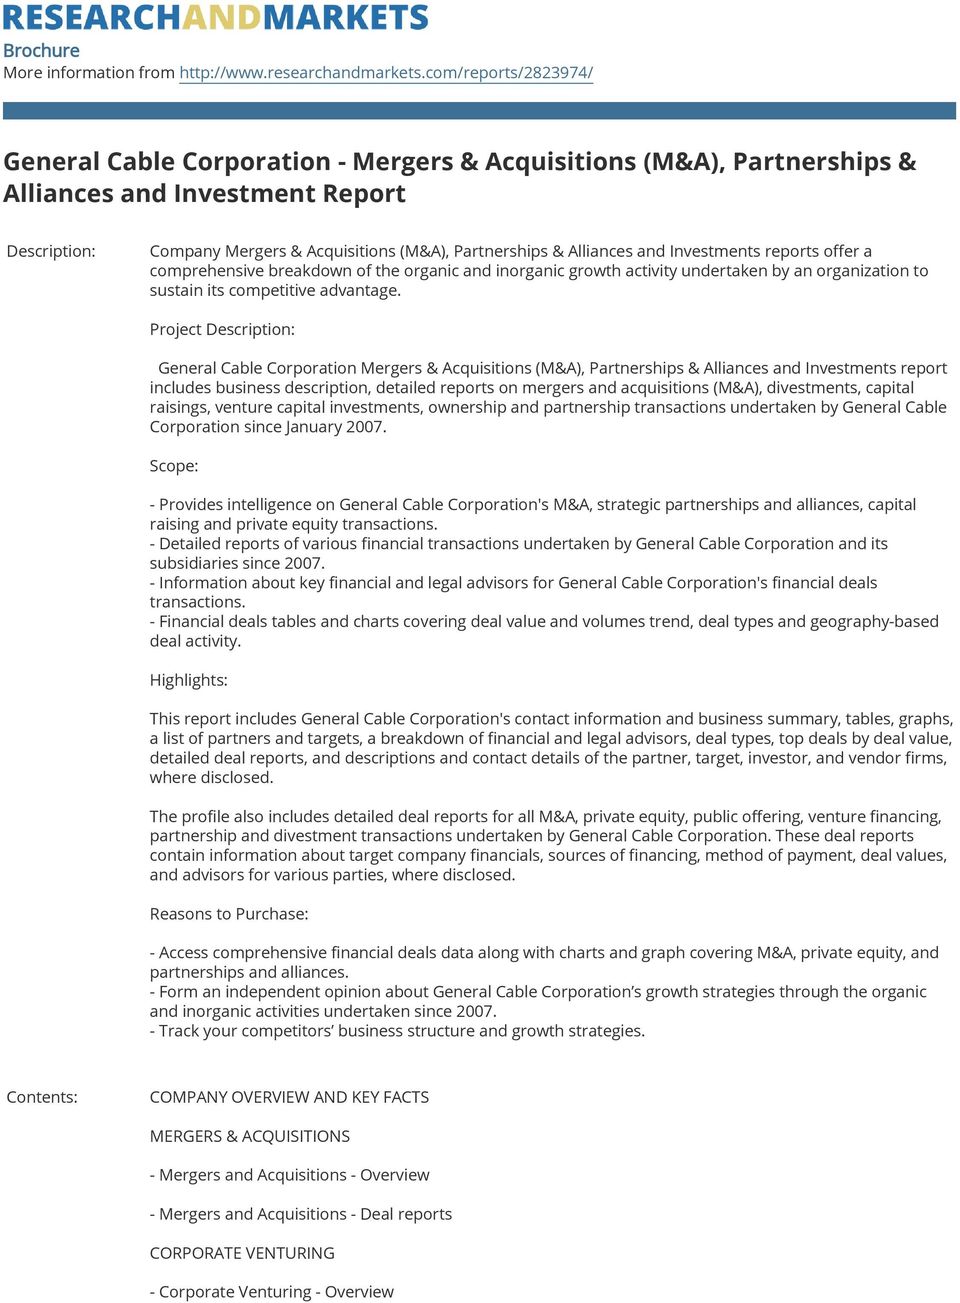 Alliances and Investments reports offer a comprehensive breakdown of the organic and inorganic growth activity undertaken by an organization to sustain its competitive advantage.